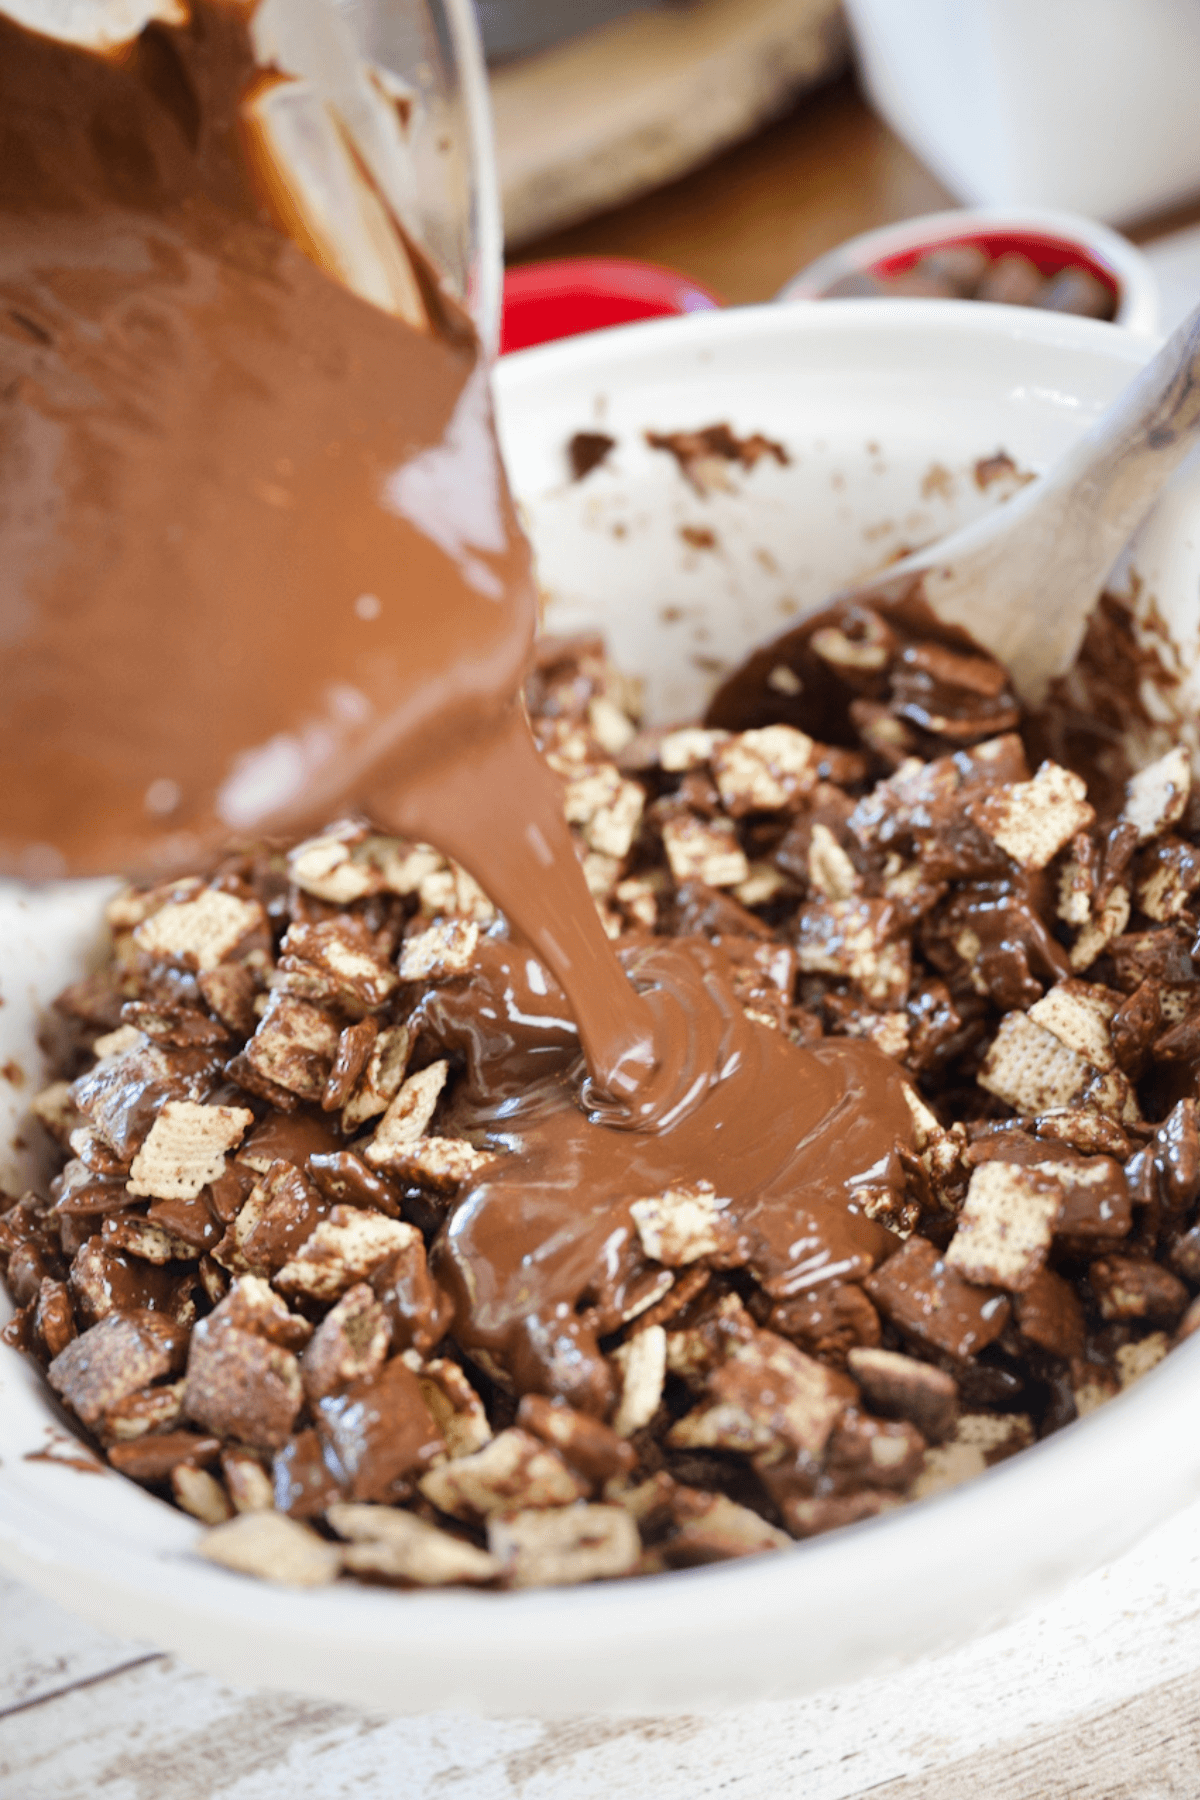 Pour balance of chocolate onto cereal and mix well.